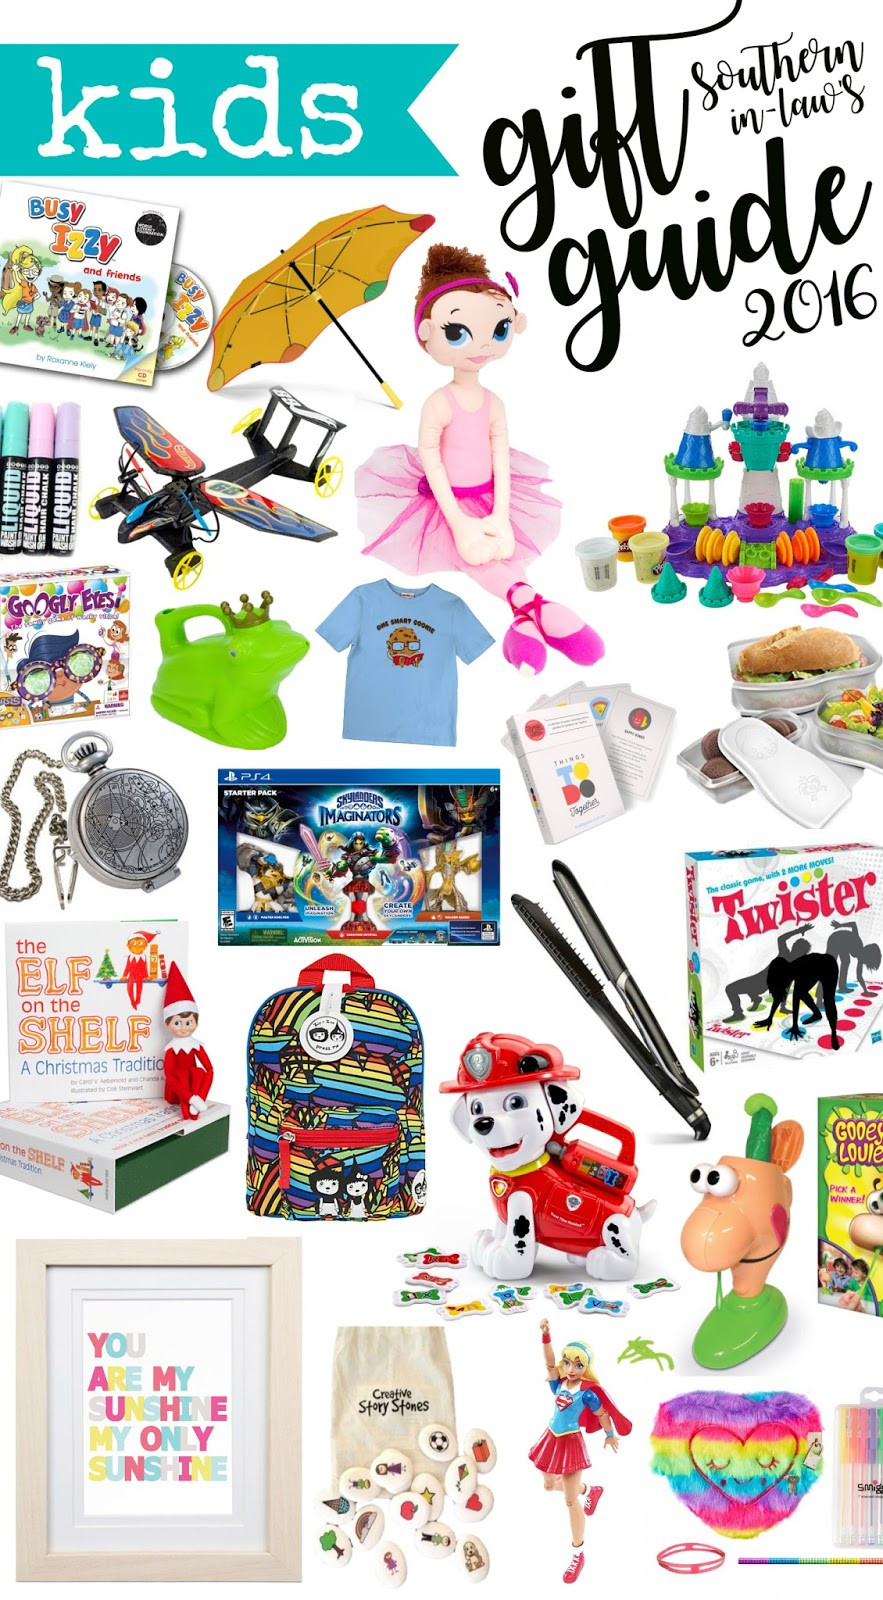 Holiday Gifts For Kids
 Southern In Law 2016 Kids Christmas Gift Guide